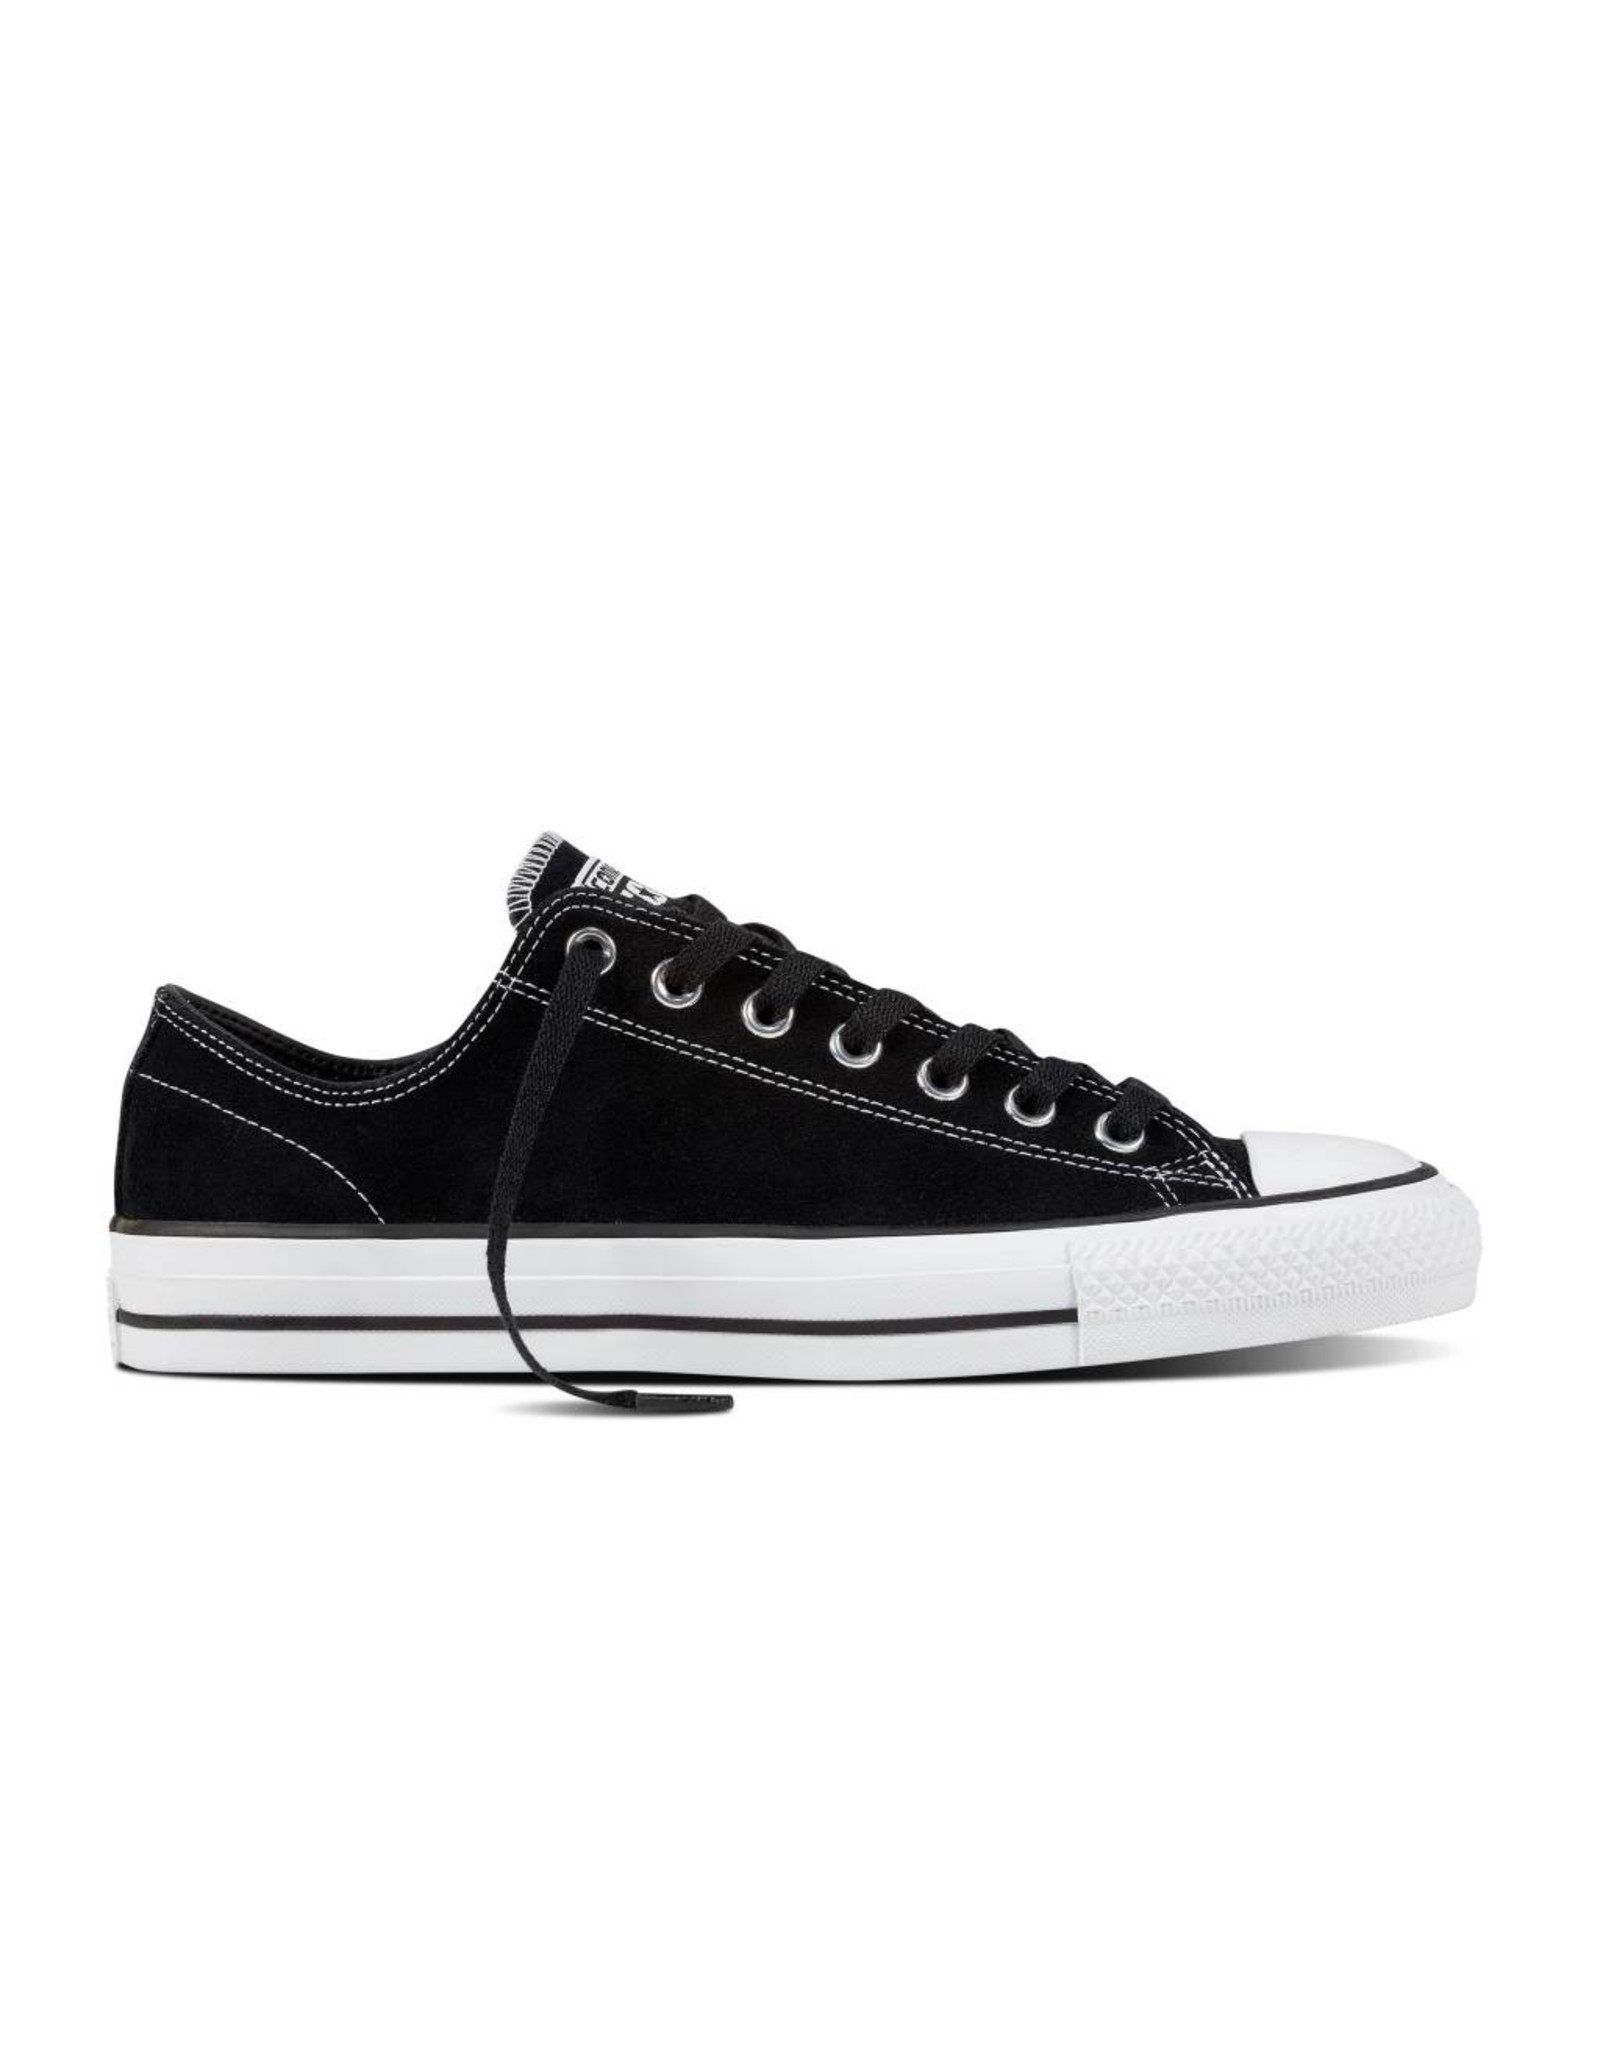 converse ct ox black sneakers